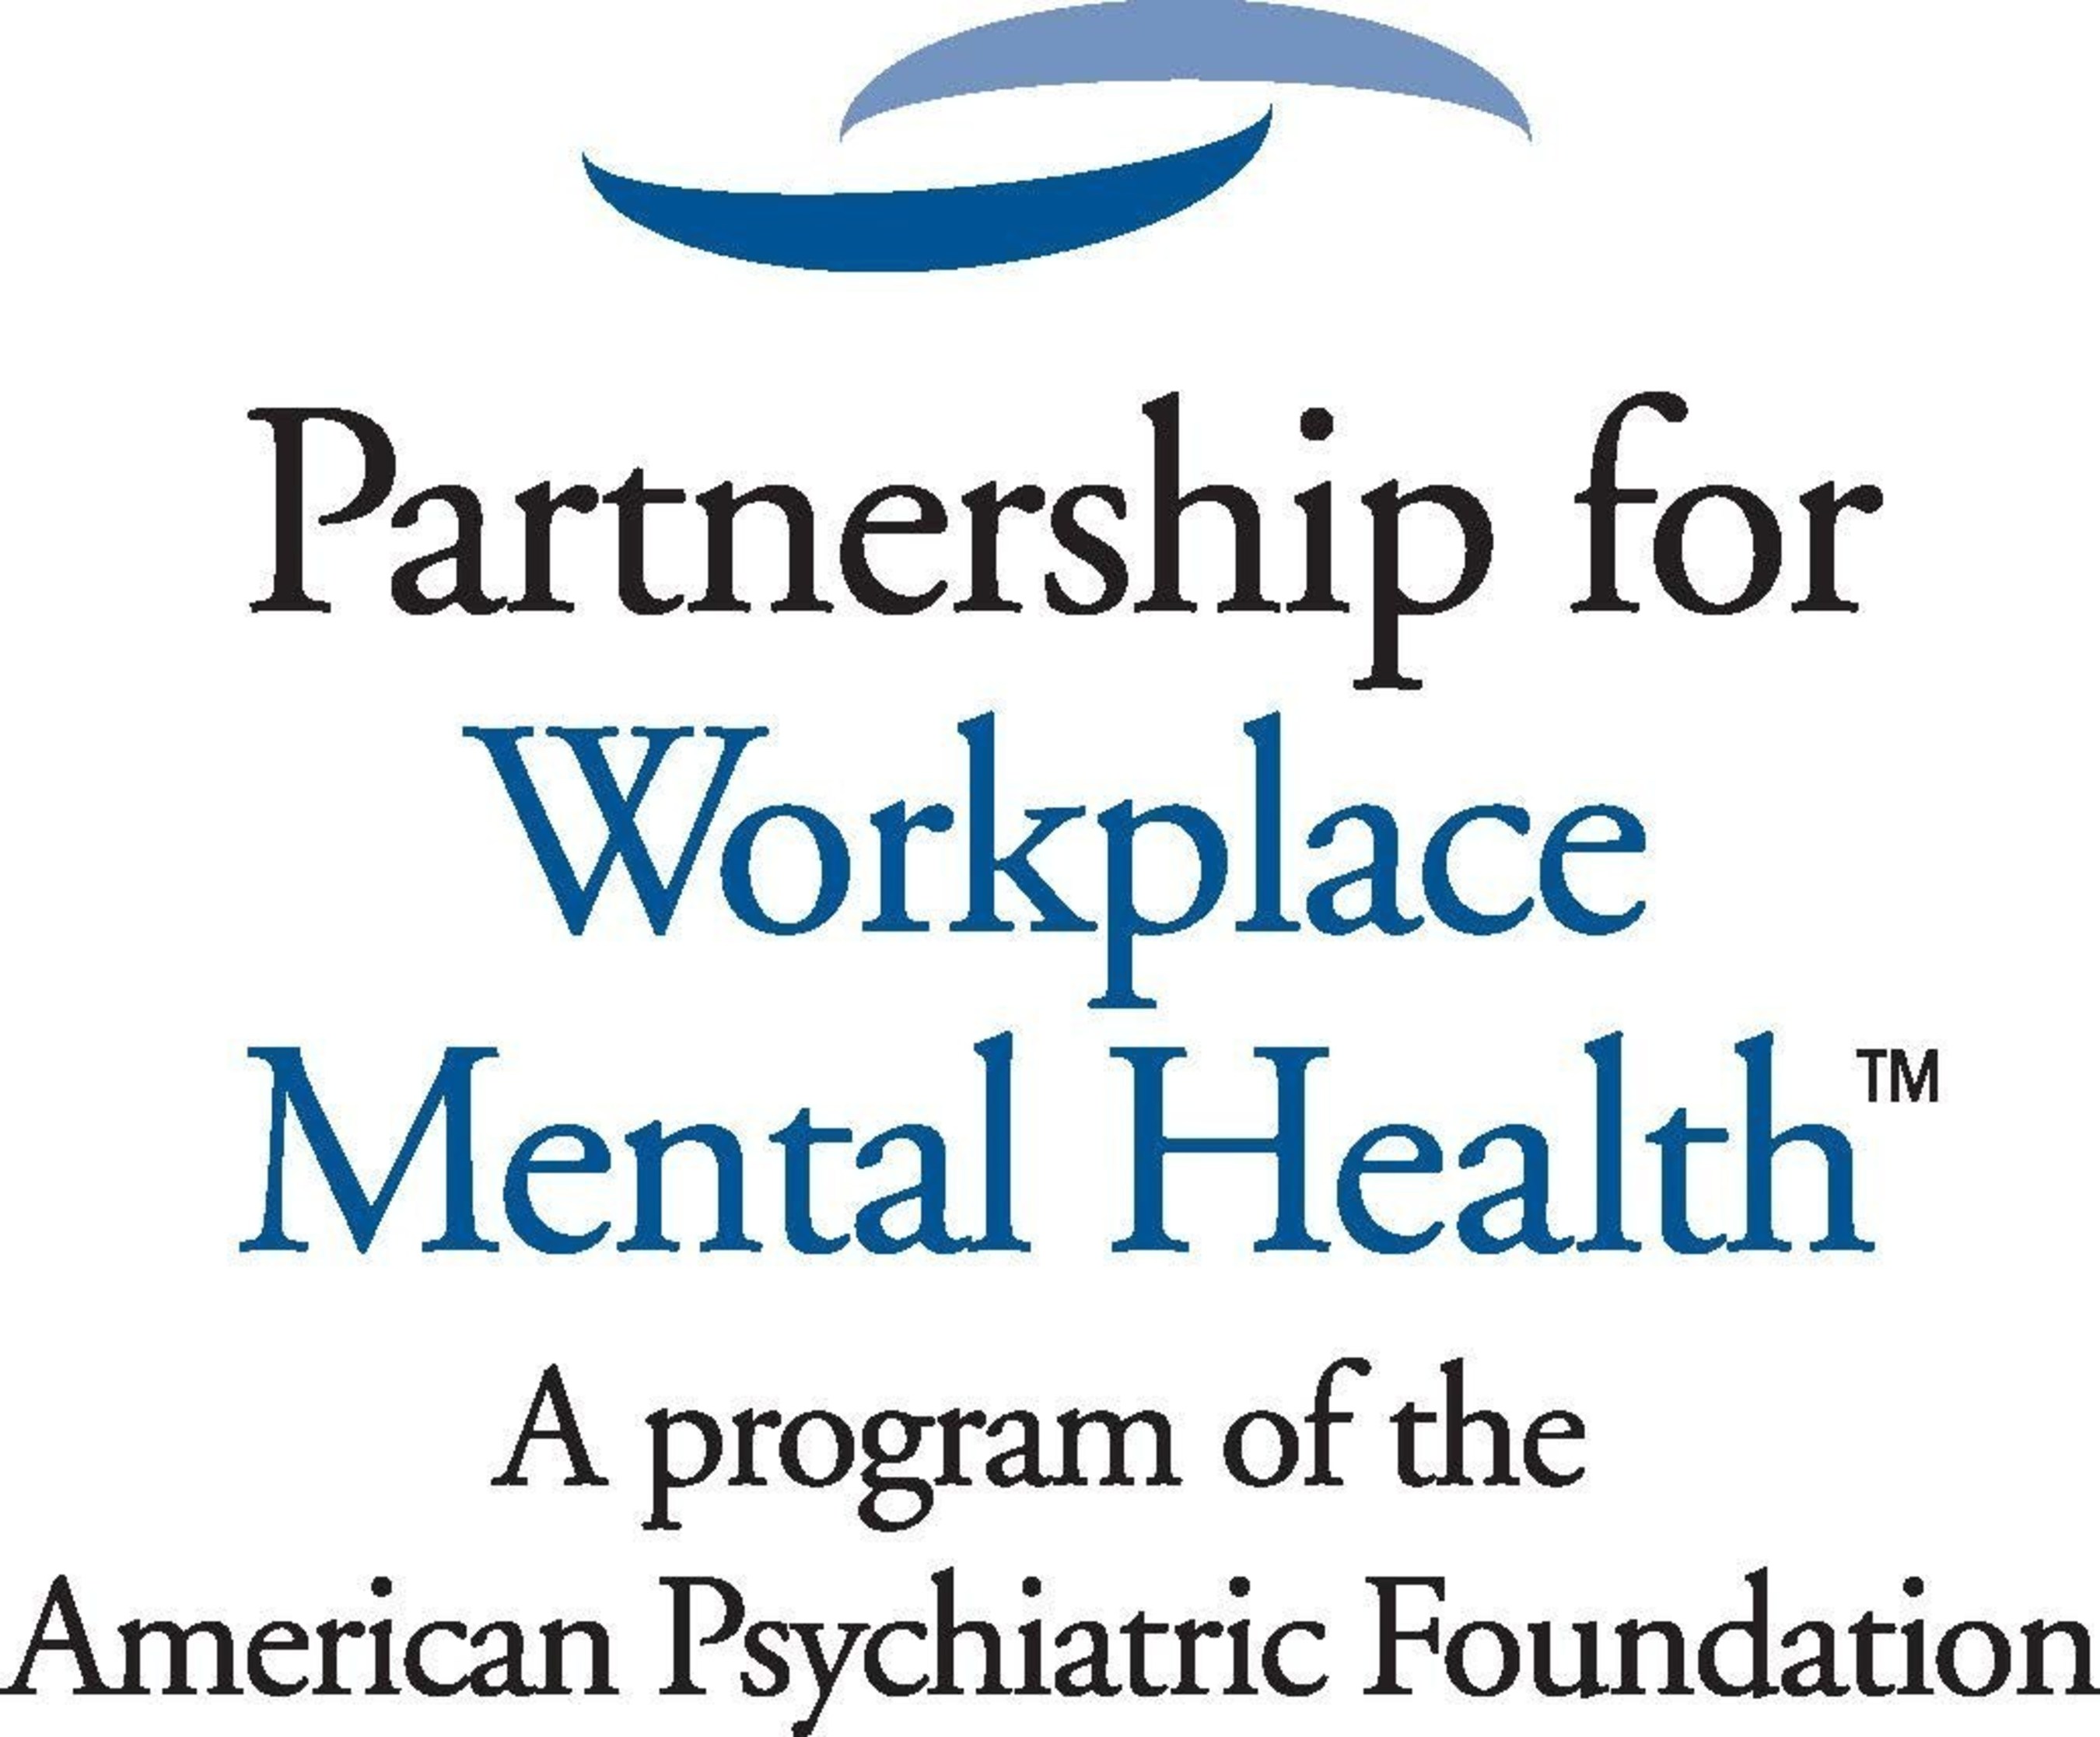 Partnership for Workplace Mental Health